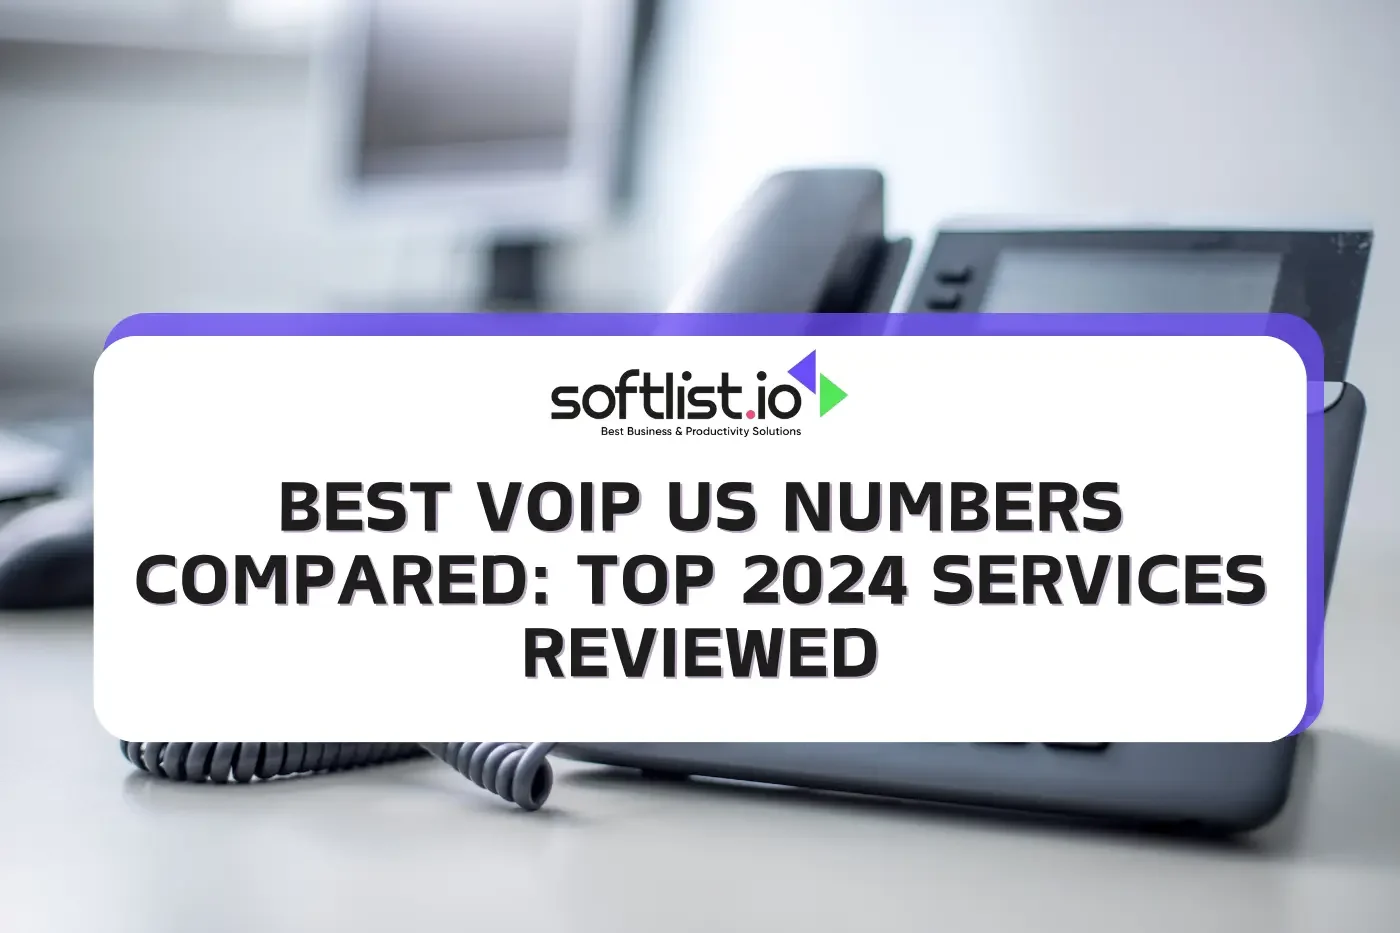 Best VoIP US Numbers Compared: Top 2024 Services Reviewed